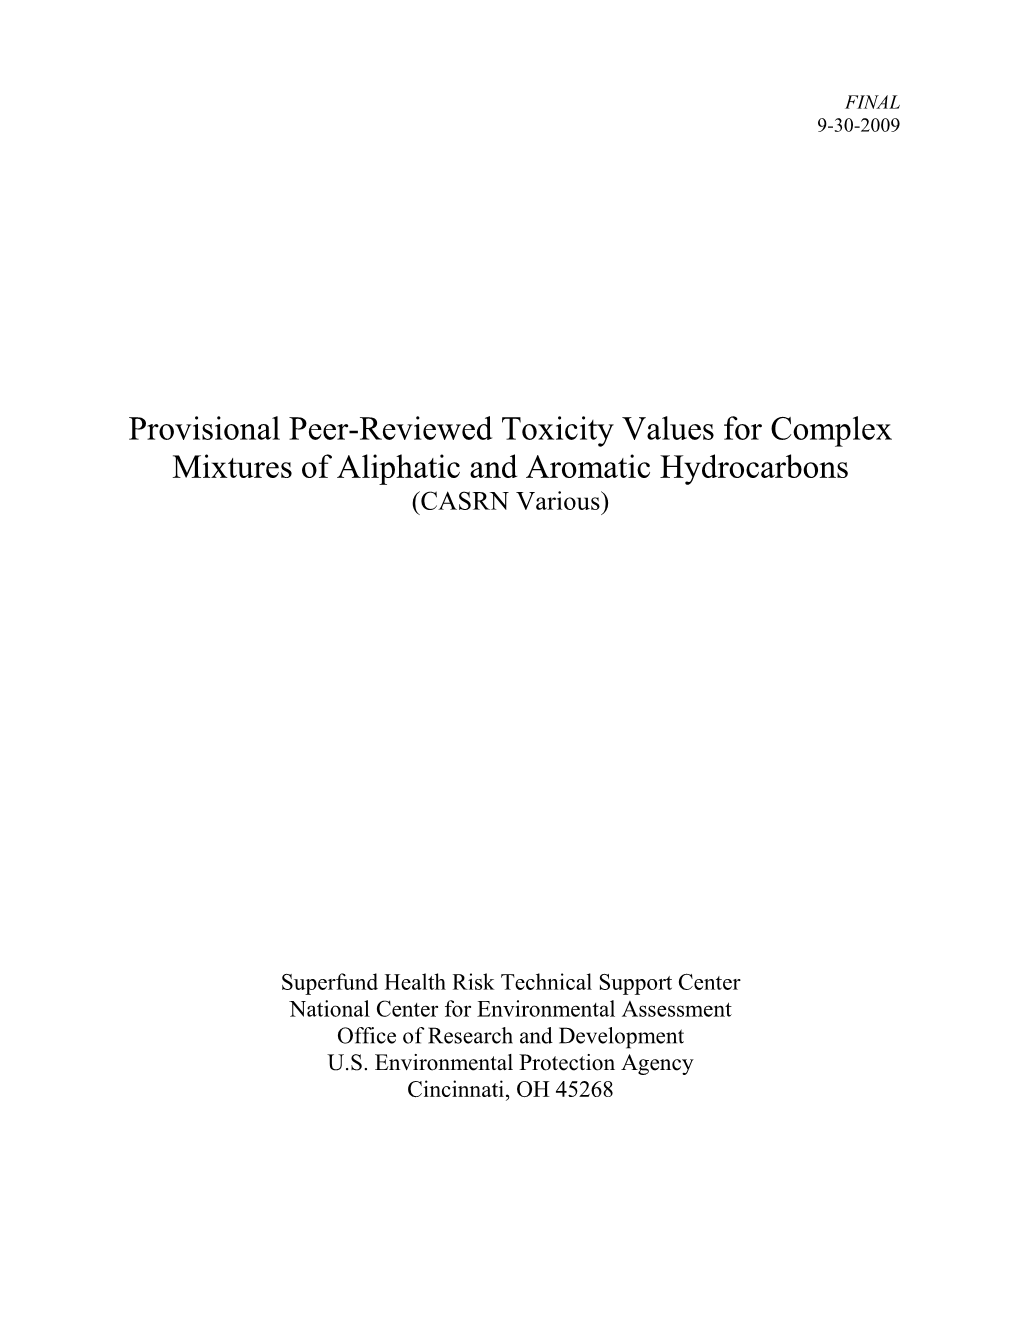 Provisional Peer-Reviewed Toxicity Values for Mixtures of Aliphatic And